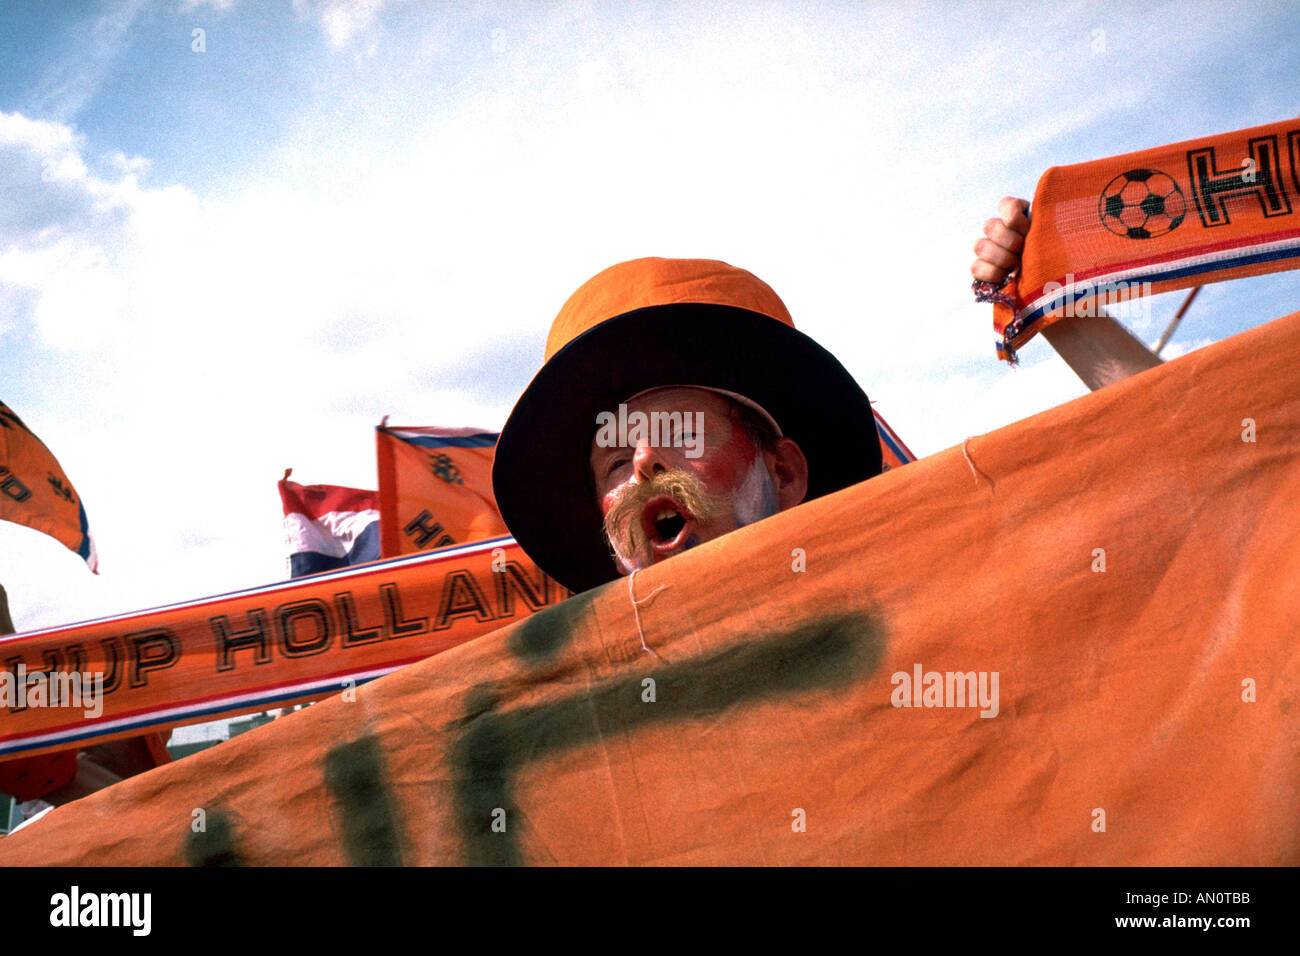 Dutch football supporters celebrating outside Wembley Stadium prior to England versus Holland match in Euro '96. Stock Photo